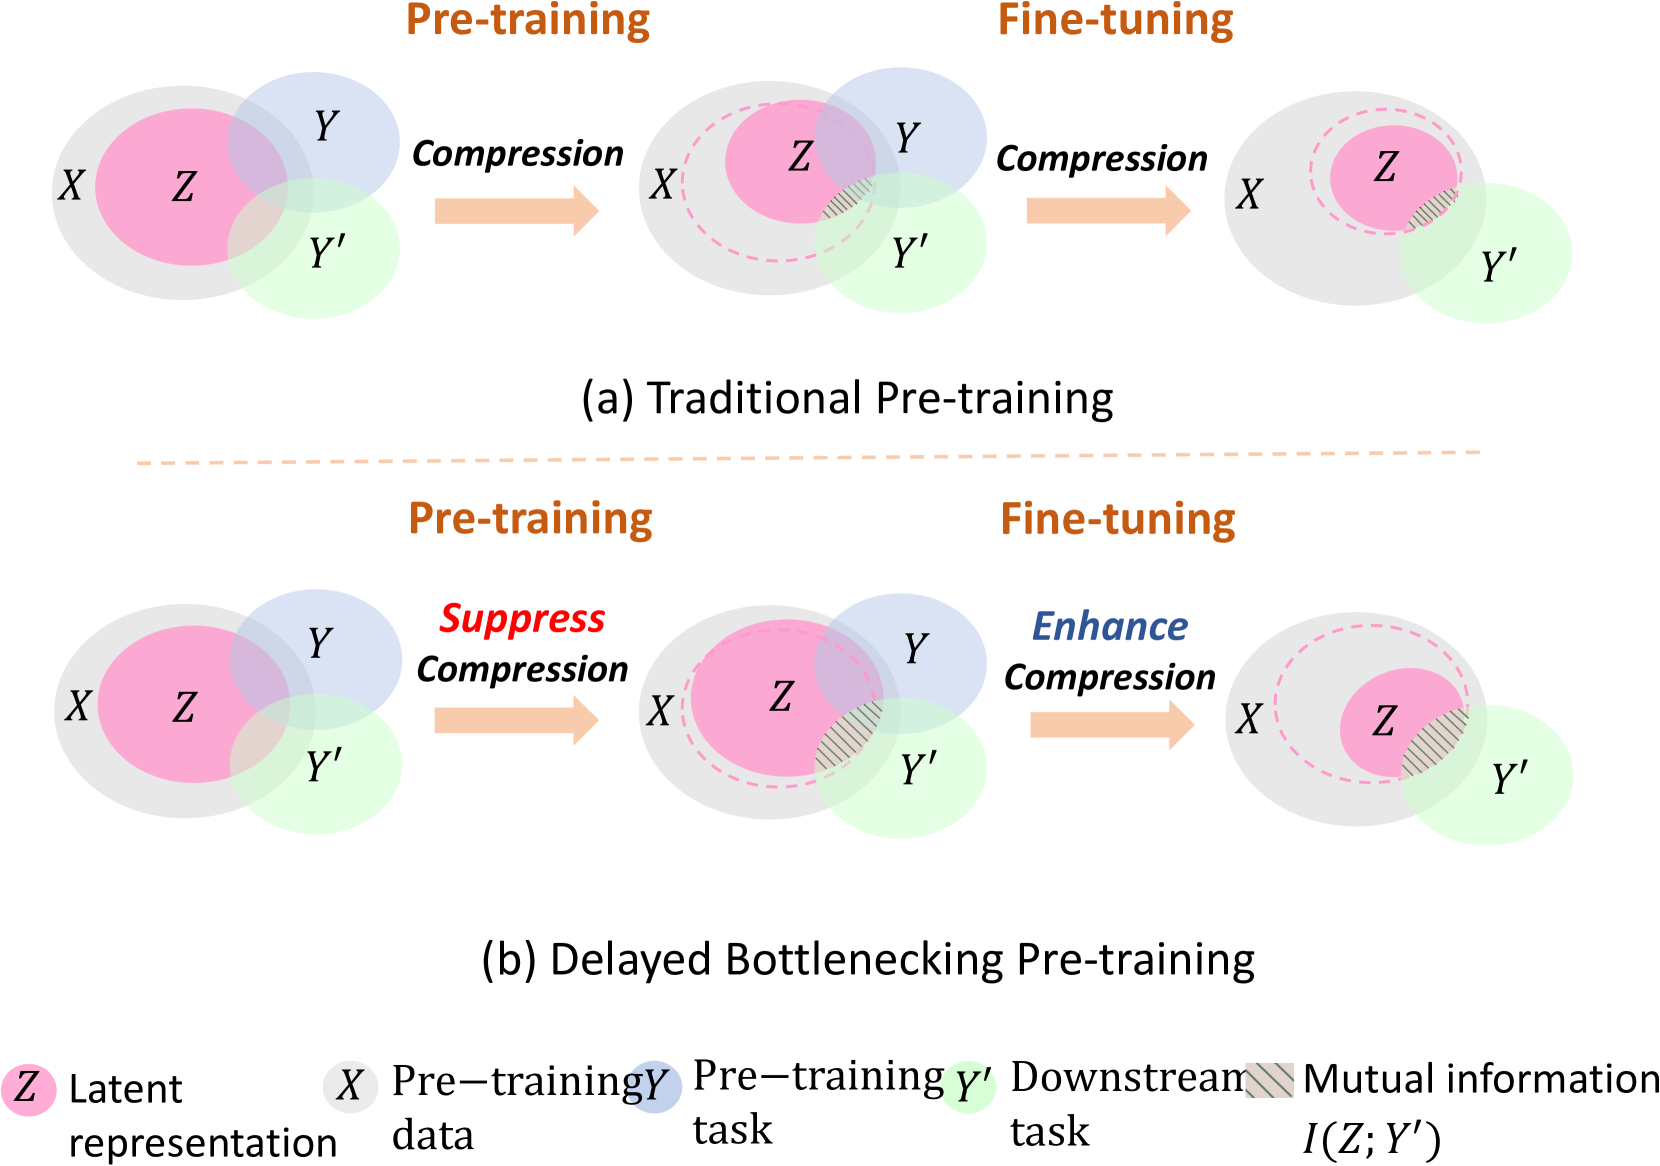 Delayed Bottlenecking: Alleviating Forgetting in Pre-trained Graph Neural Networks